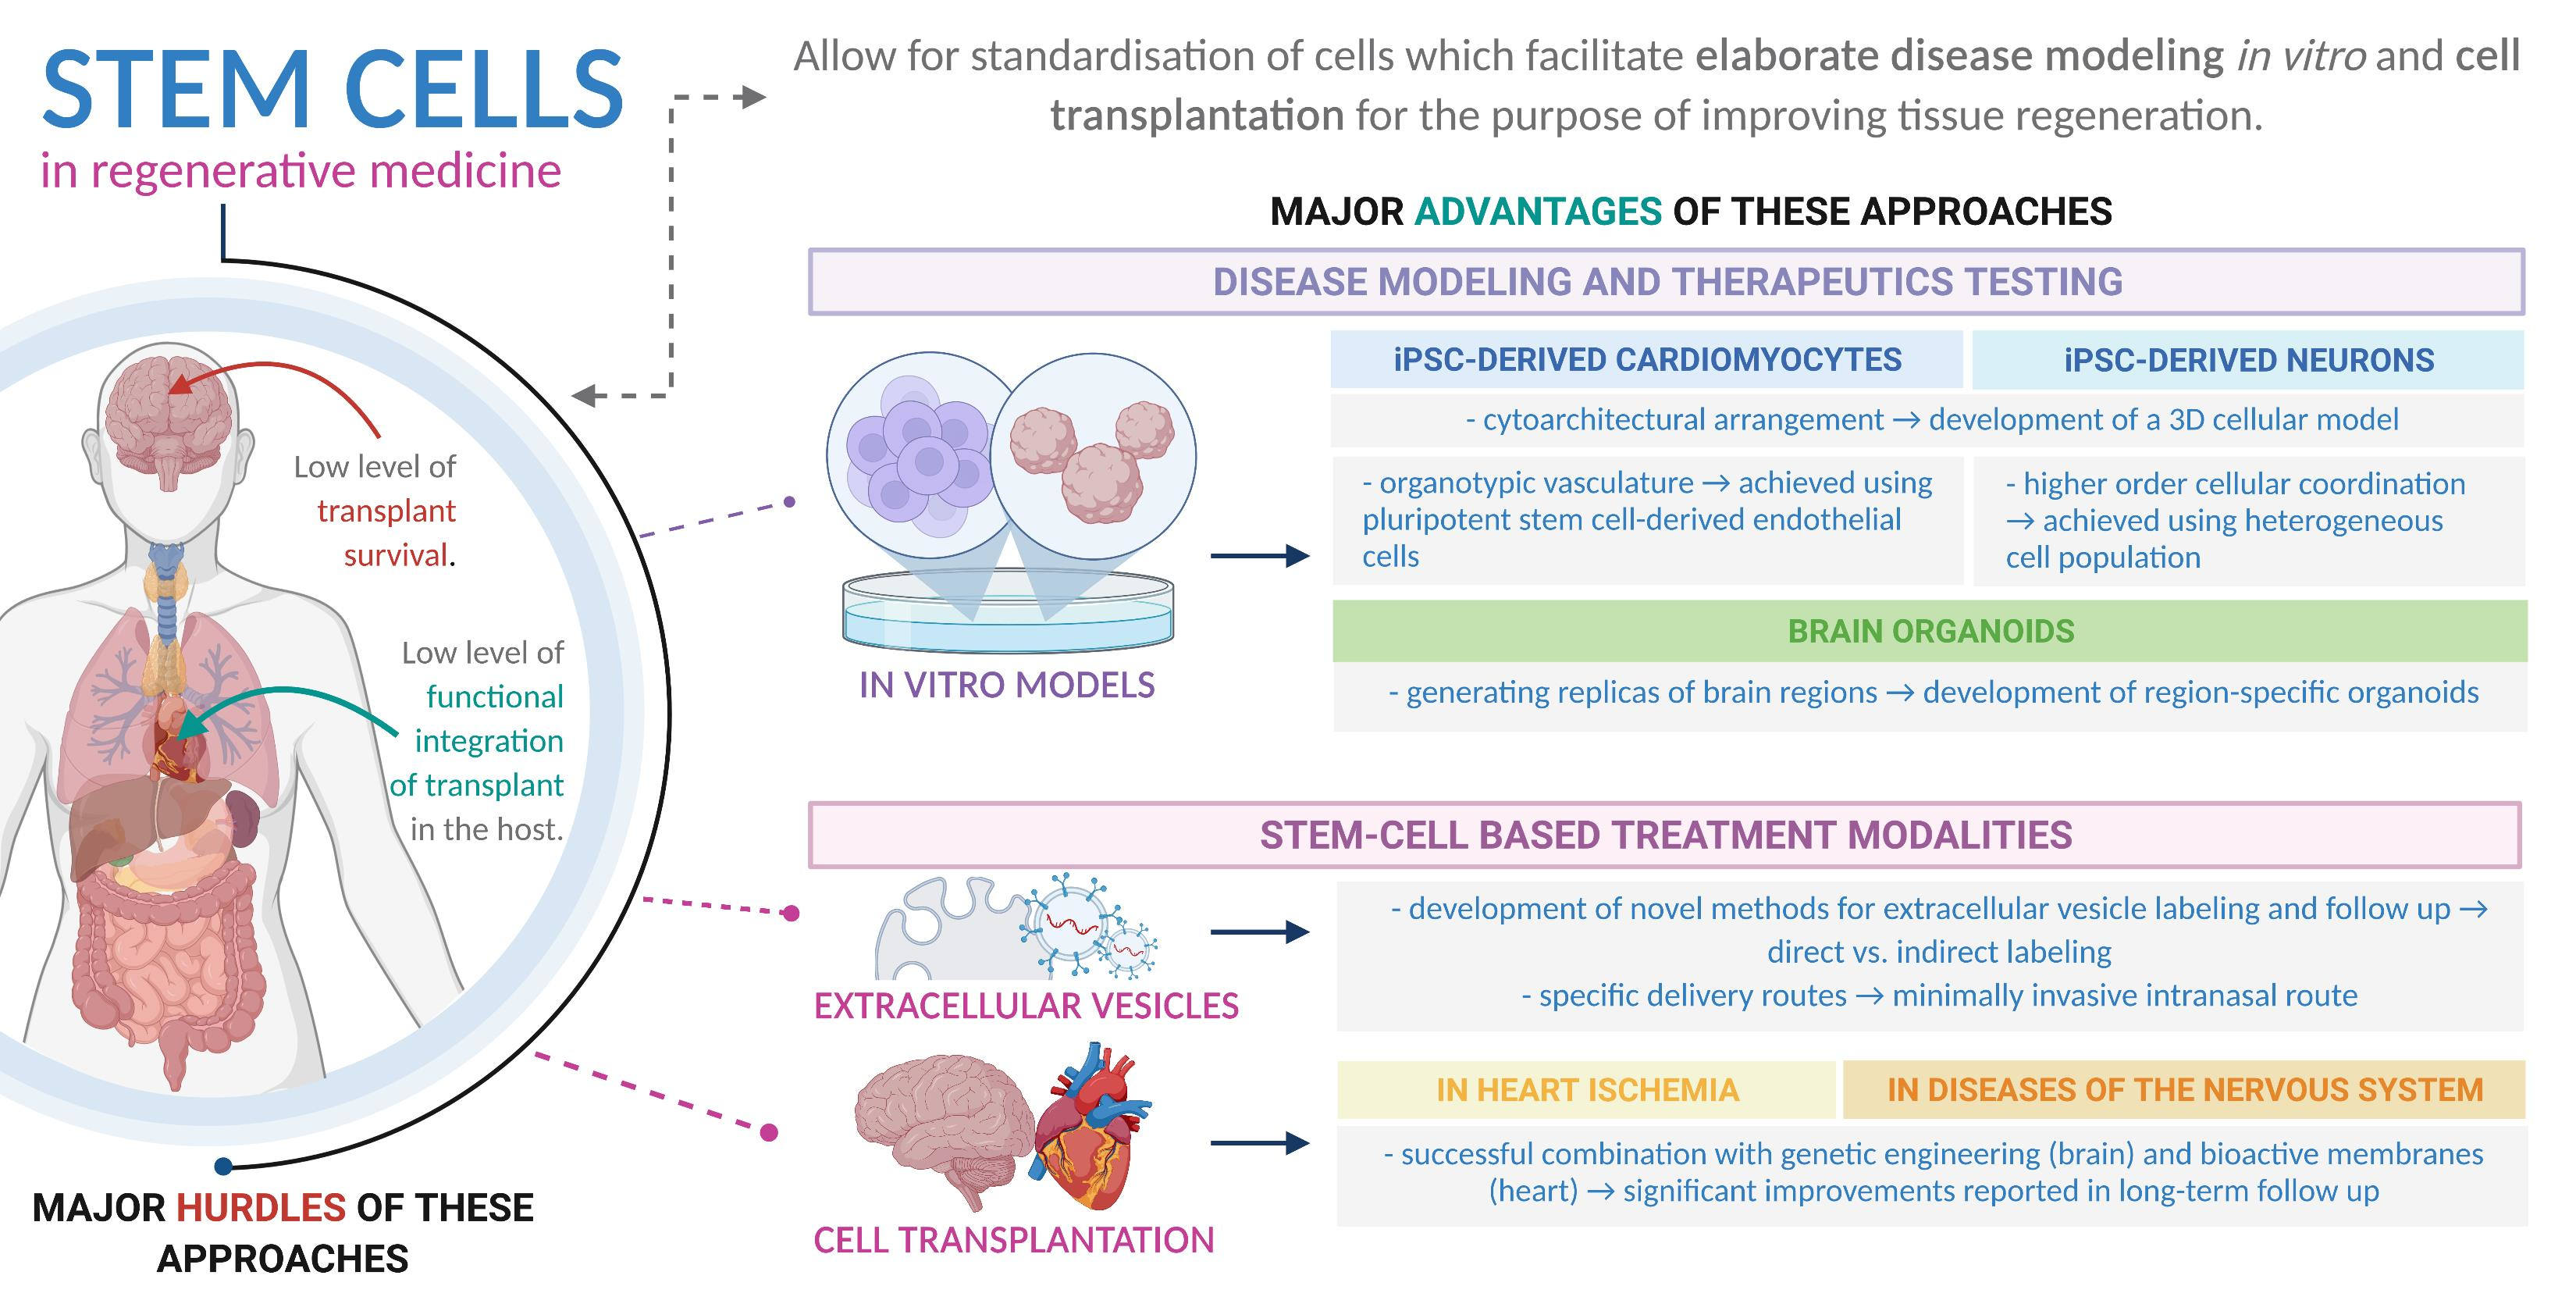 Stem Cell Therapies Expand Horizon of Regenerative Medicine - Science in  the News